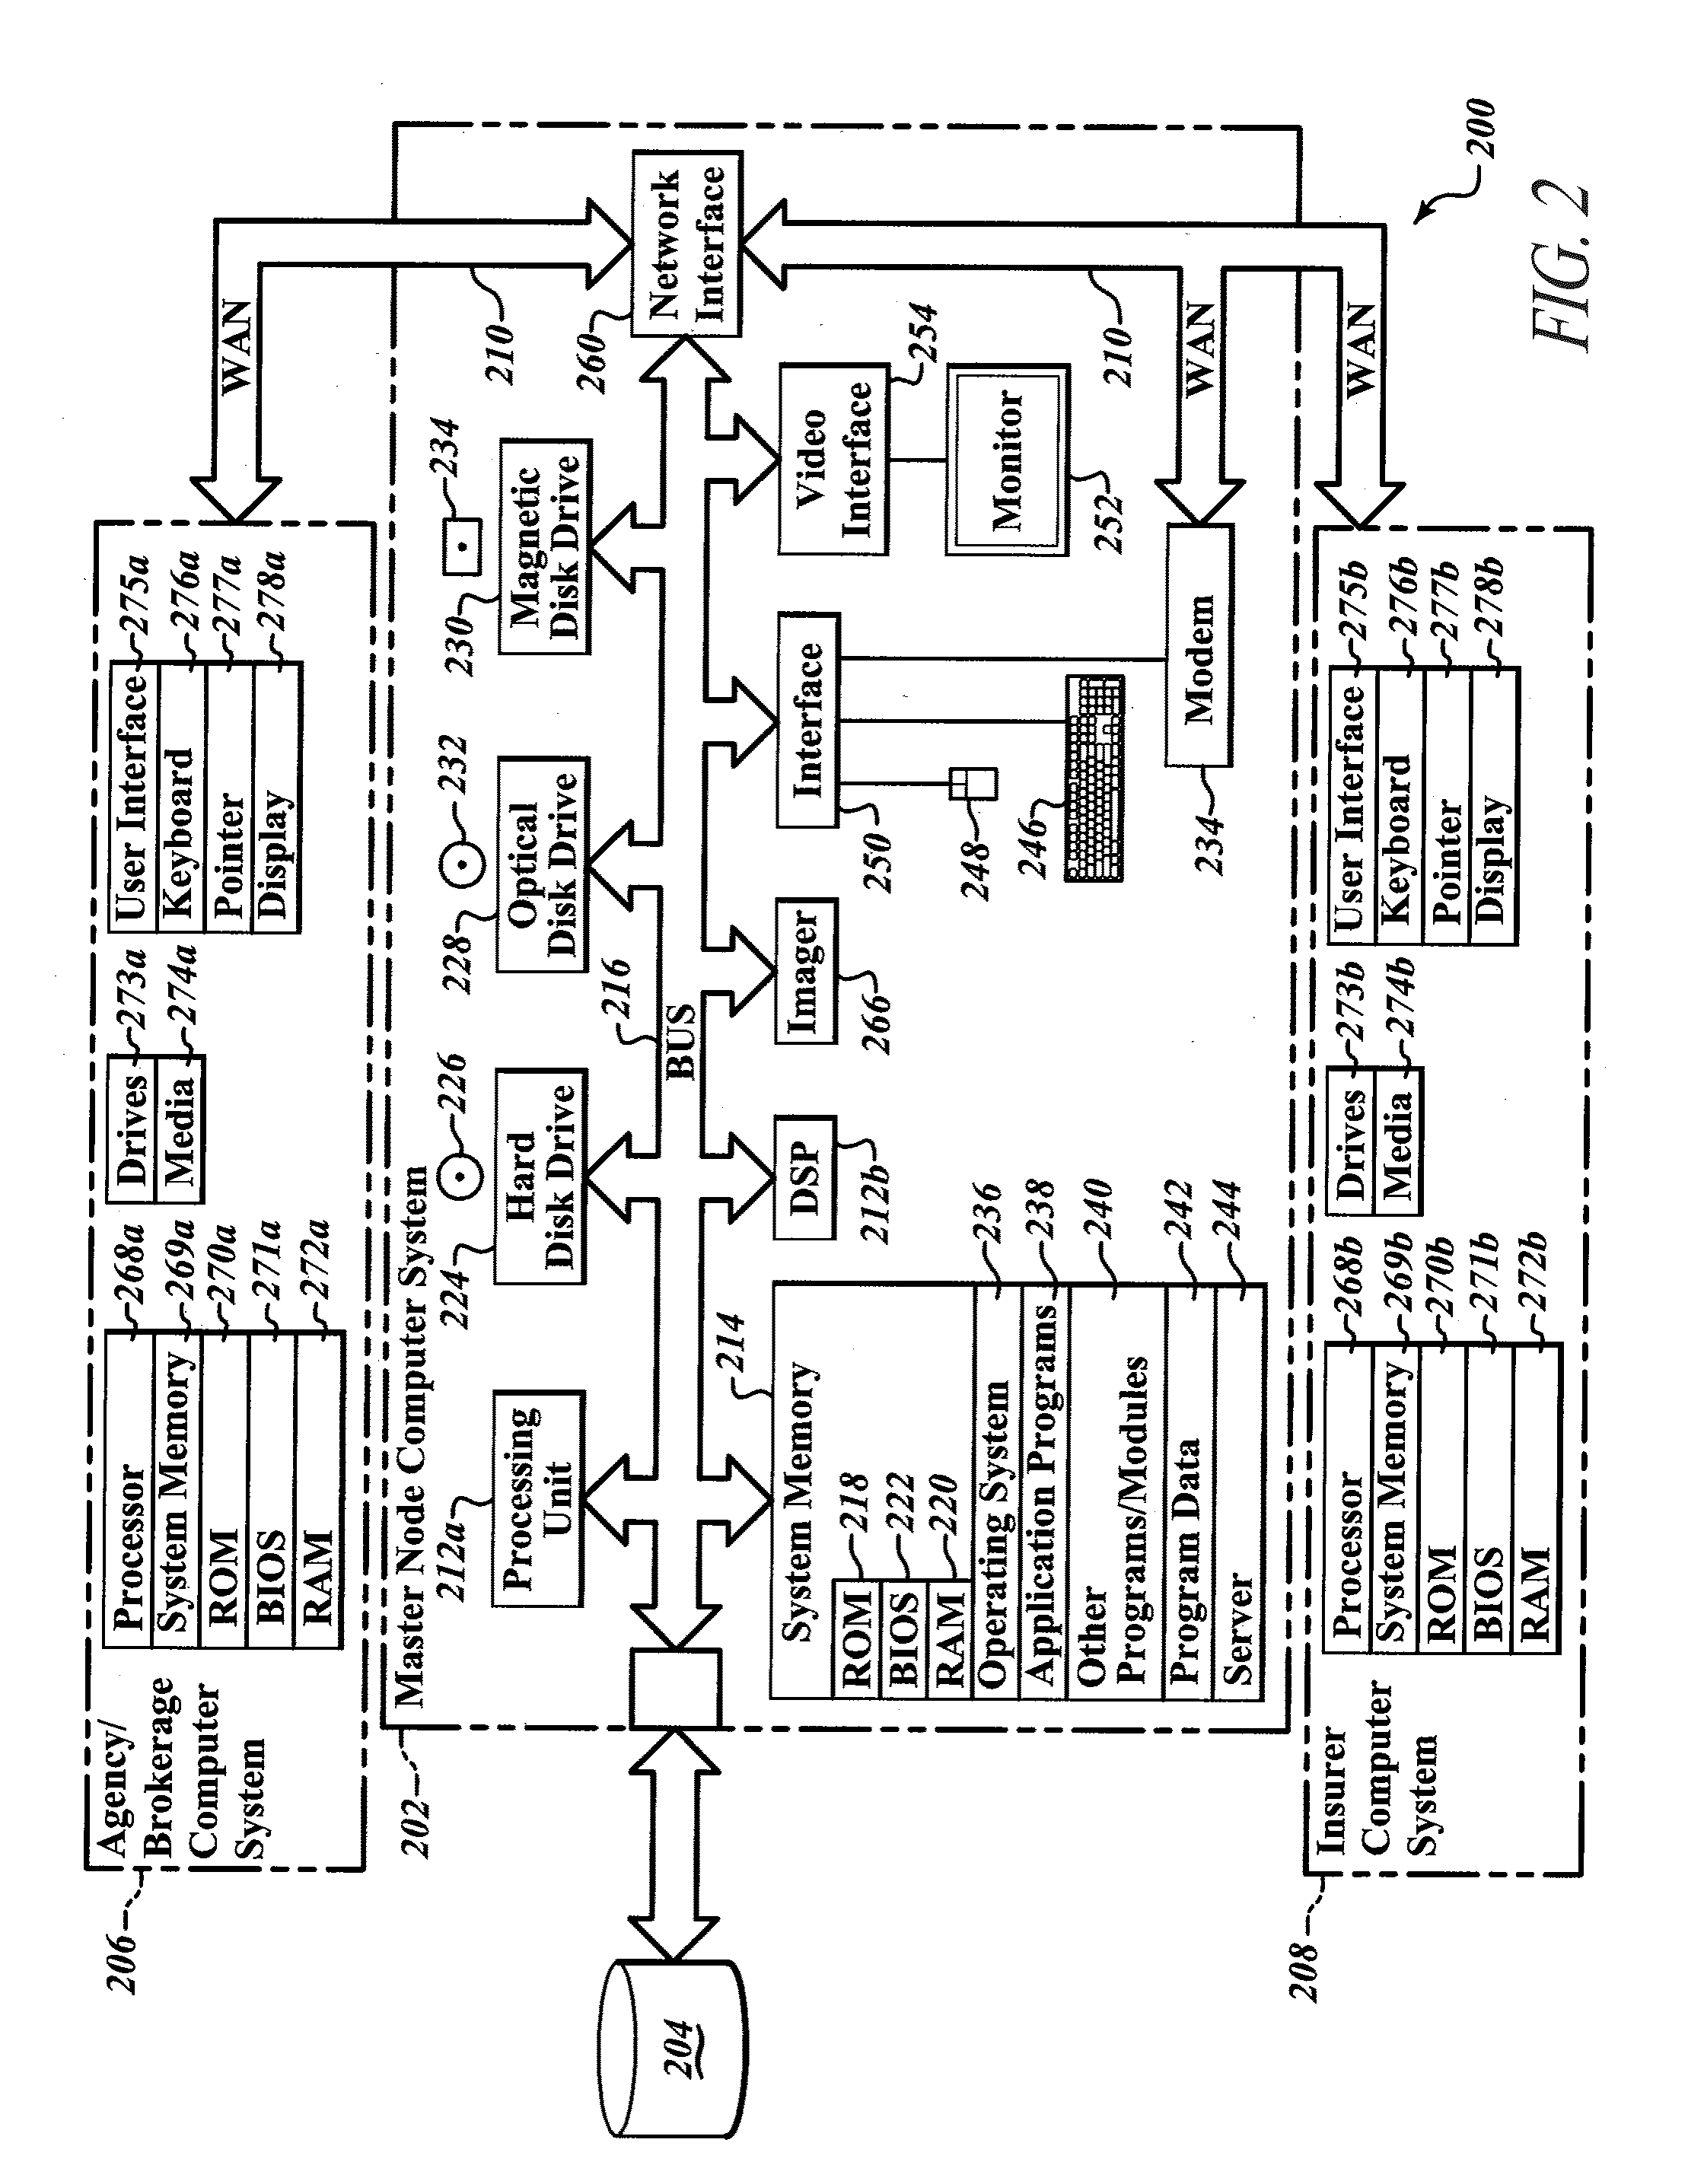 Apparatus, method and article to provide an insurance workflow management system